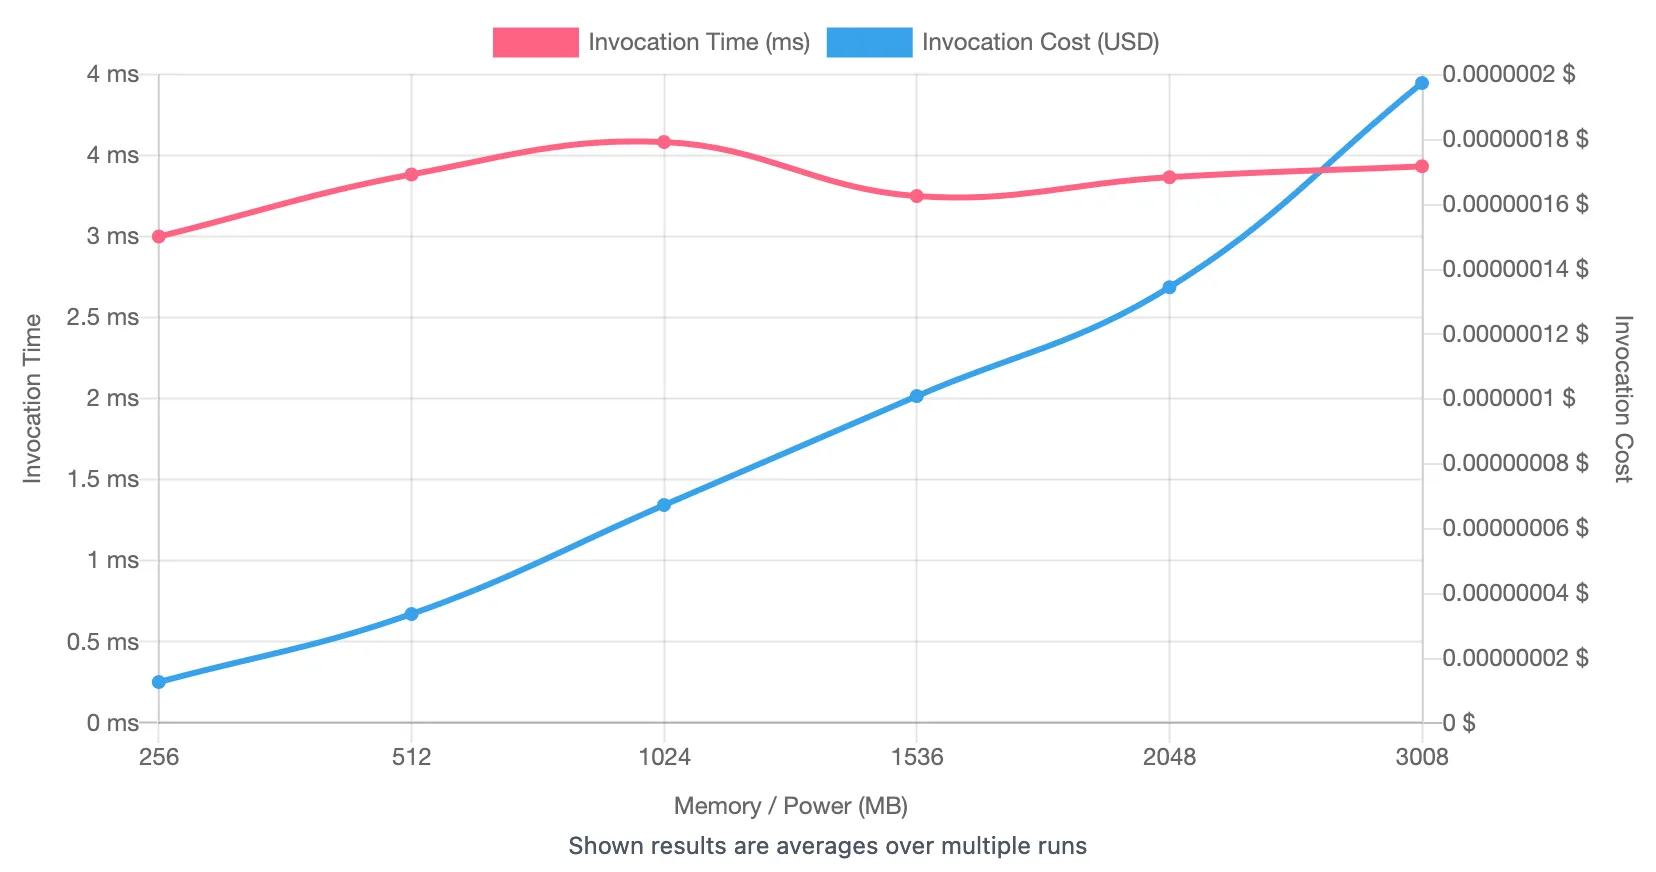 As memory increases, invocation time stays the same and cost goes up.